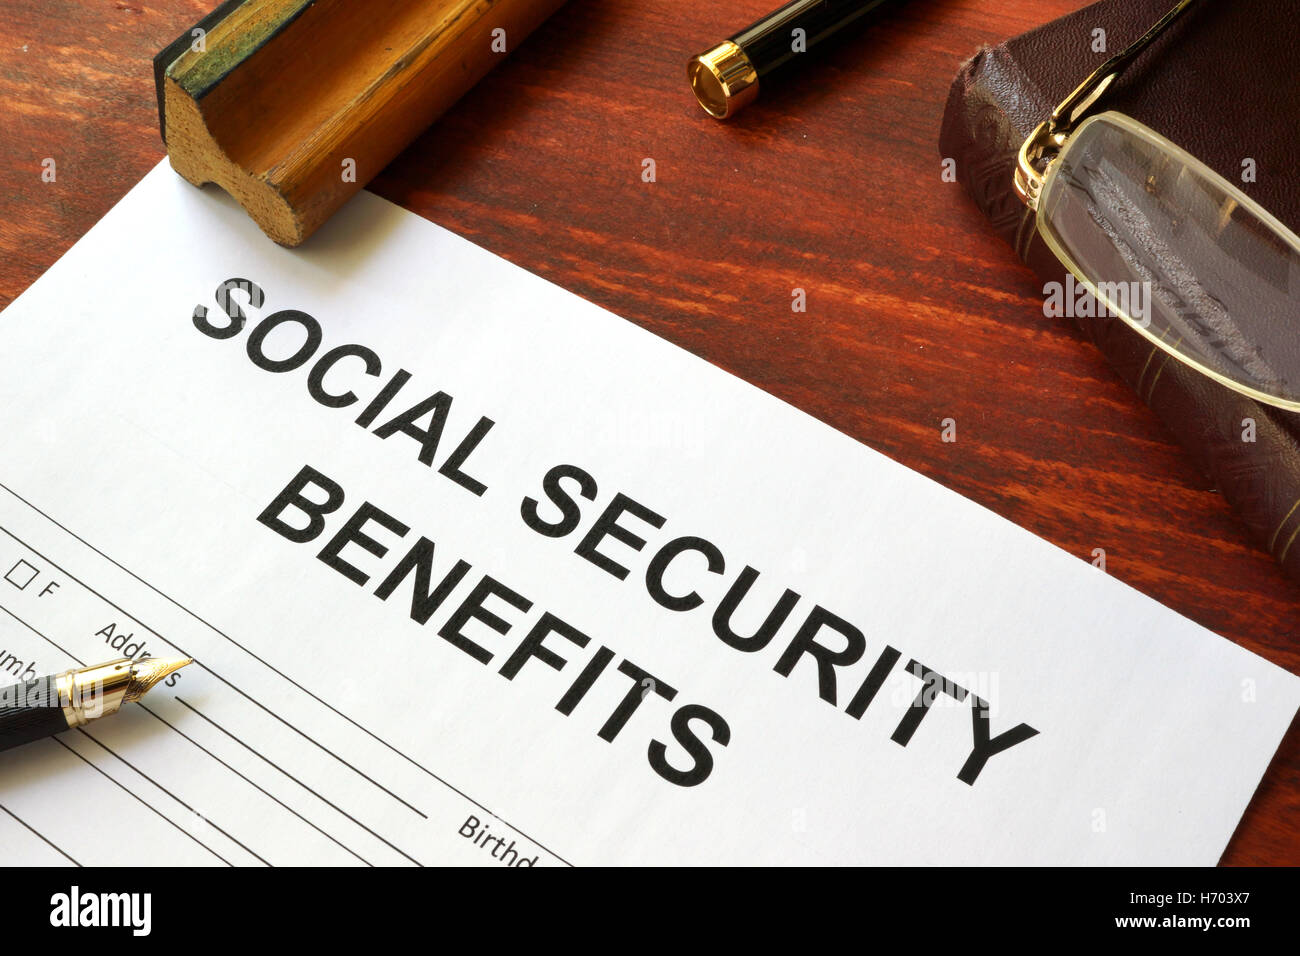 Social security benefits form, book and glasses. Stock Photo